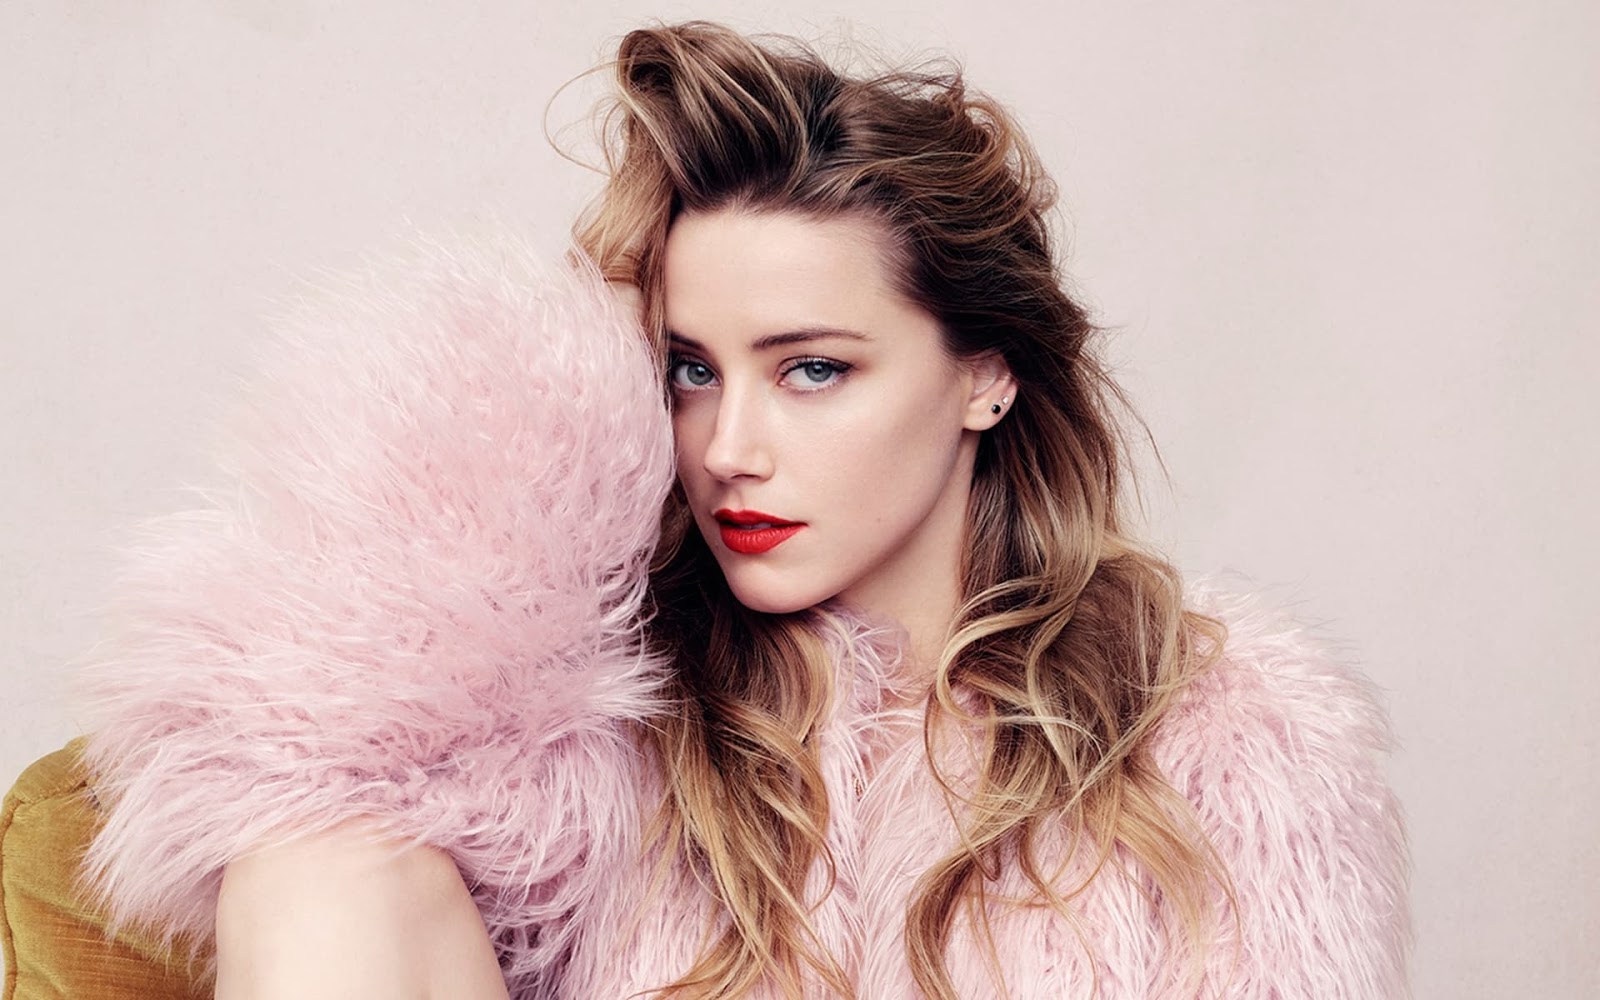 Amber Heard HD Images and Wallpapers - Hollywood Actress